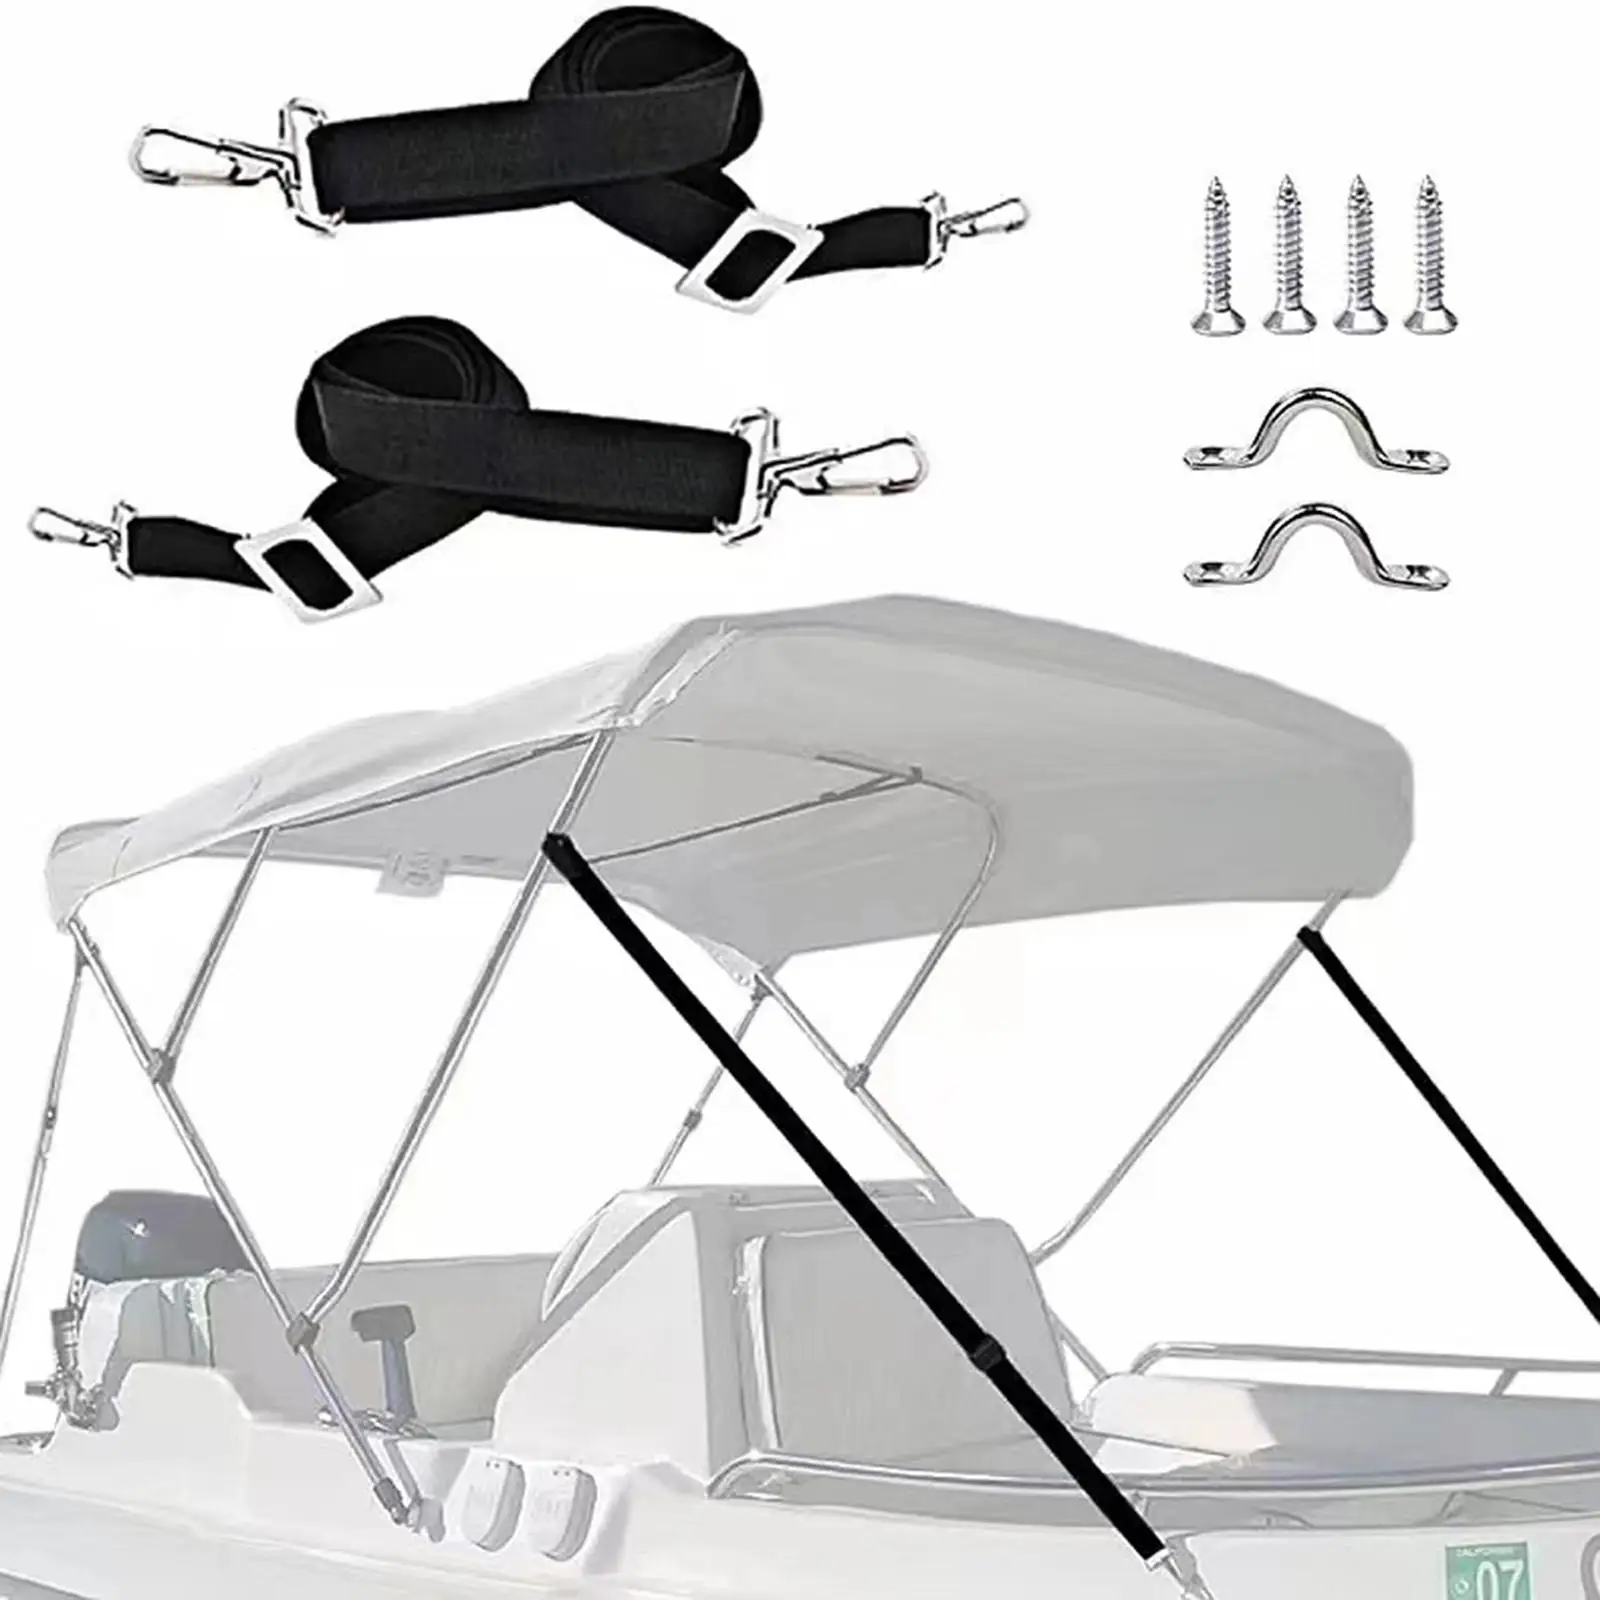 2x Adjustable Bimini Top Straps with Loop Snap Hooks Pad Eye Straps Tie Down Webbing Straps Bimini Awning Straps for Canoe